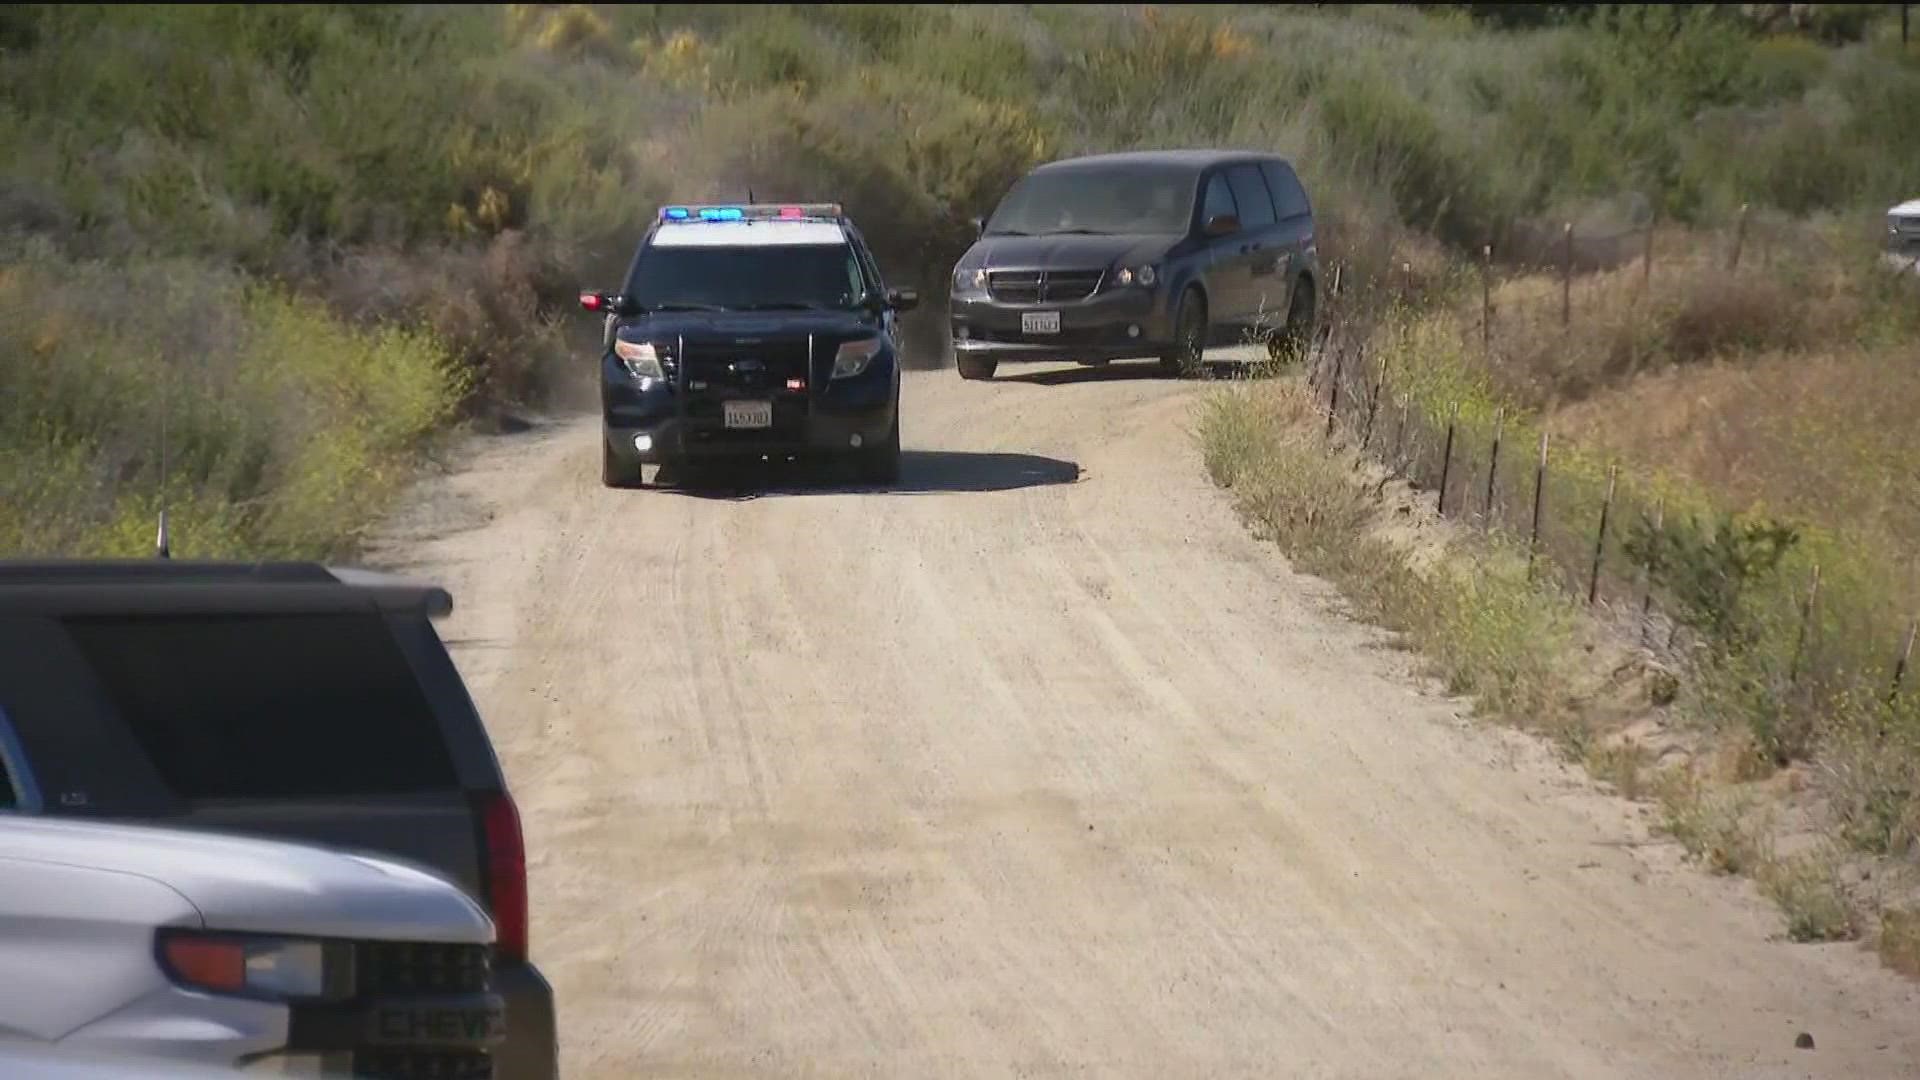 According to Border Patrol, the agent was thrown from the vehicle before being found by another agent.